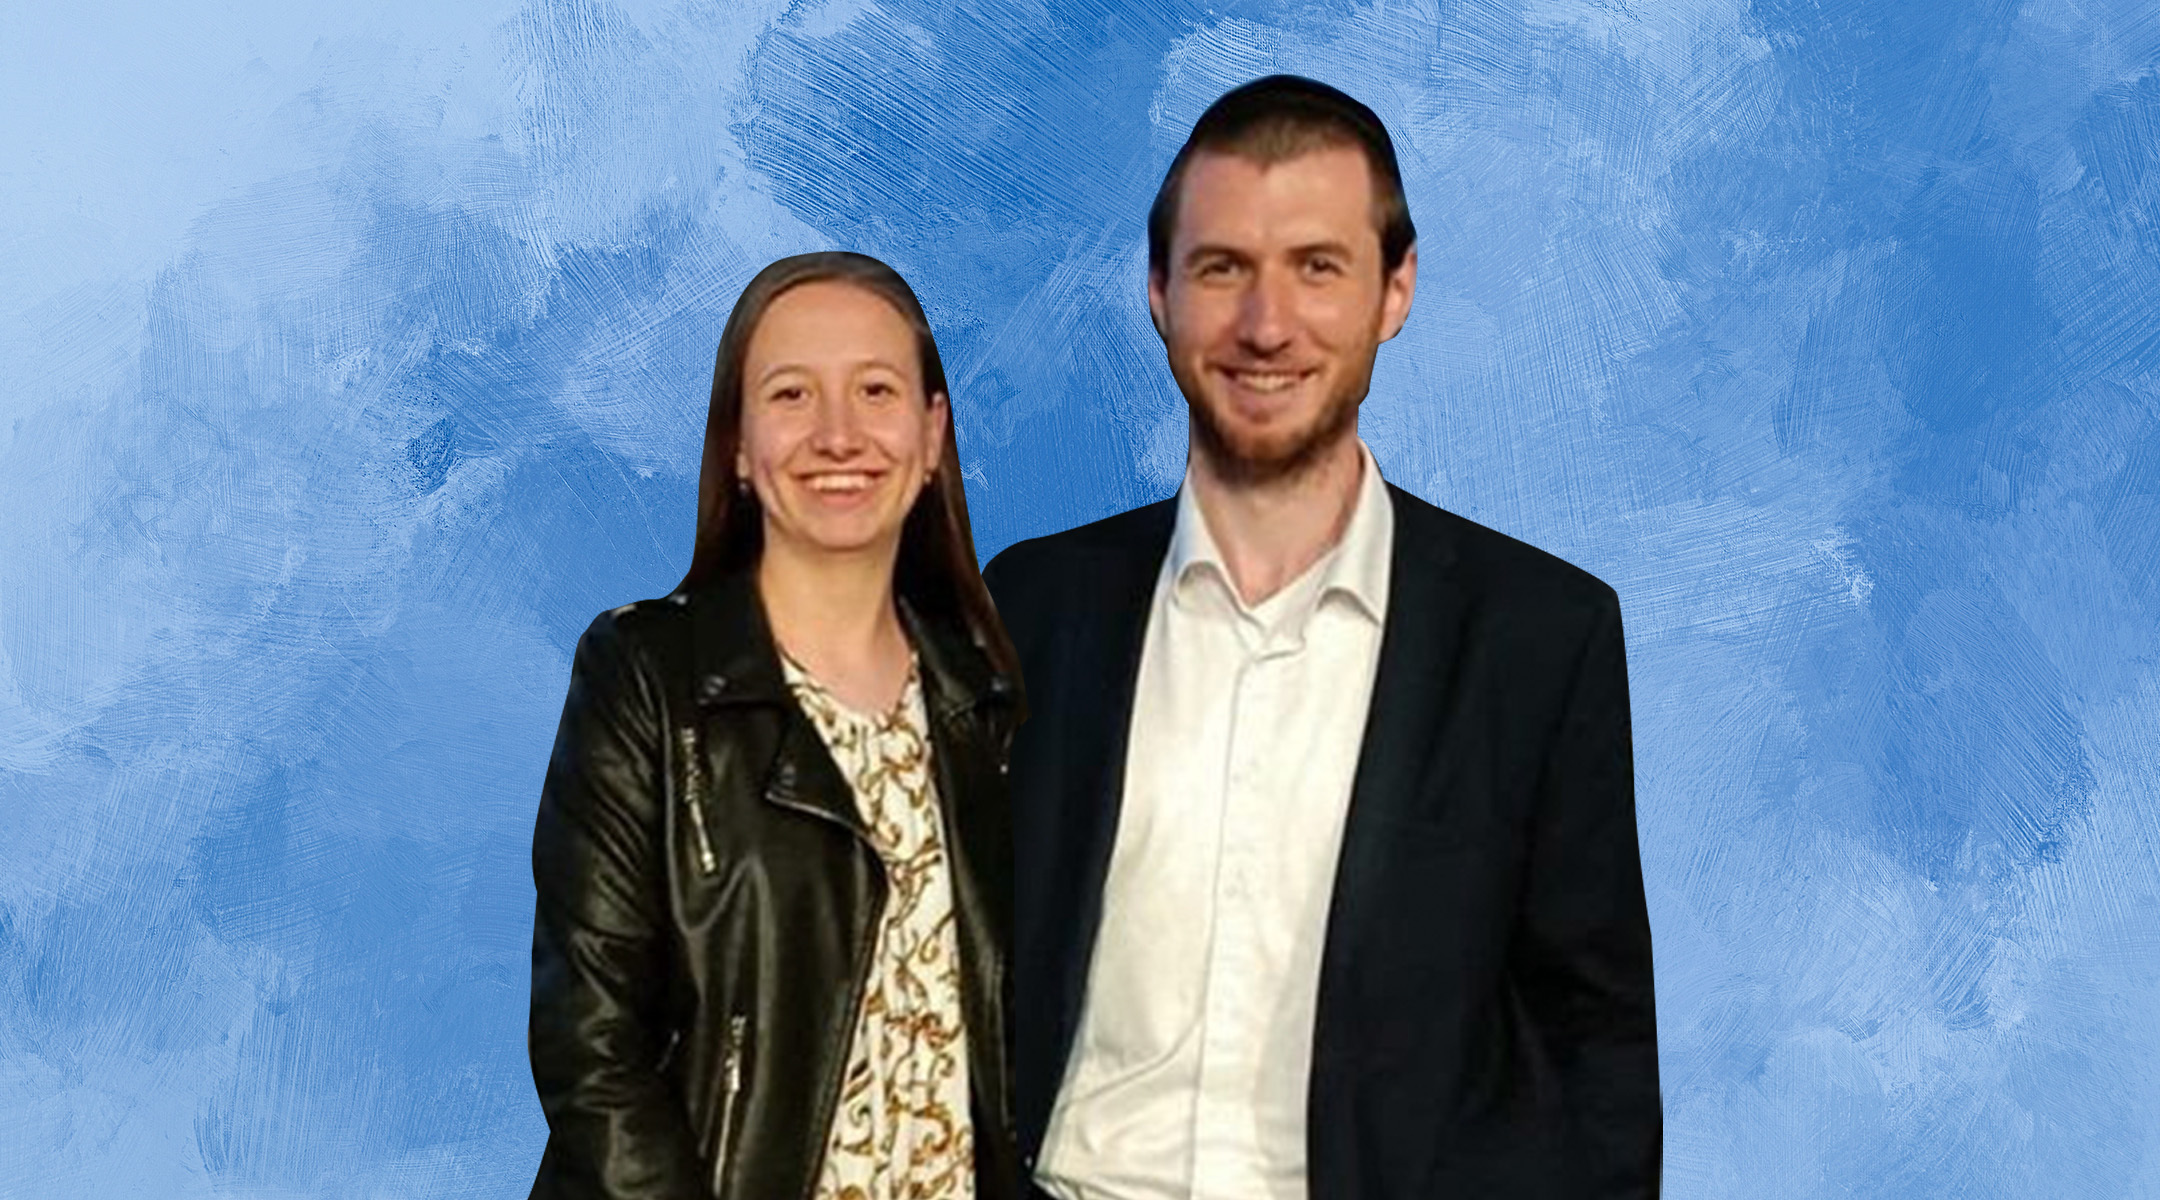 Malka Burkeeva and Yakov Poluden knew each in Kyiv, but didn’t start dating until they made it out of the war and safely into Israel. (Courtesy, design by Mollie Suss)